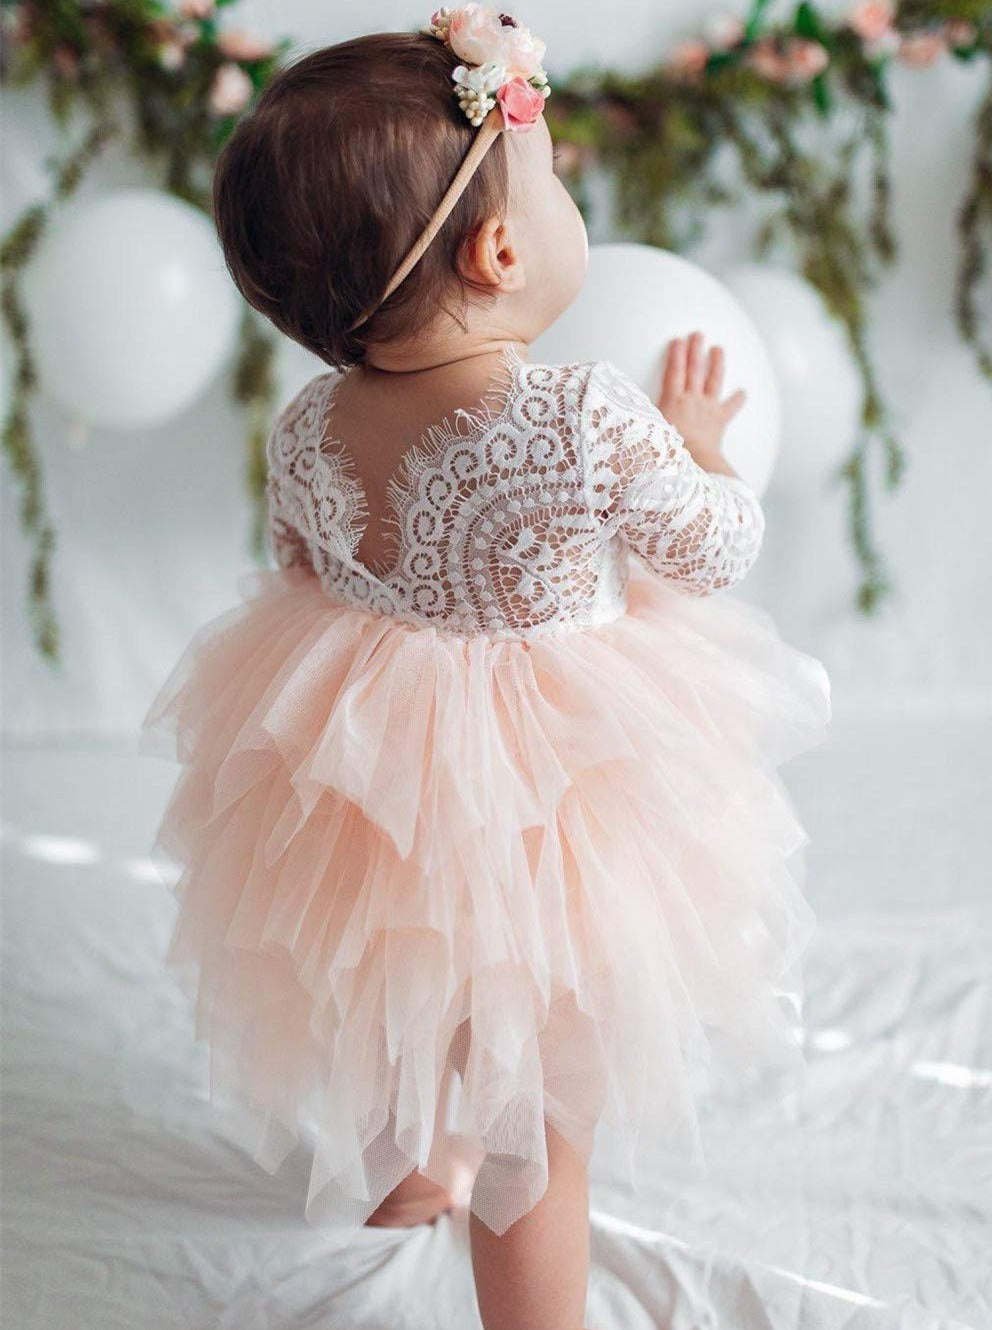 2Bunnies Flower Girl Dress Peony Lace Back A-Line Long Sleeve Tiered Tulle Short (Pink) - 2BUNNIES